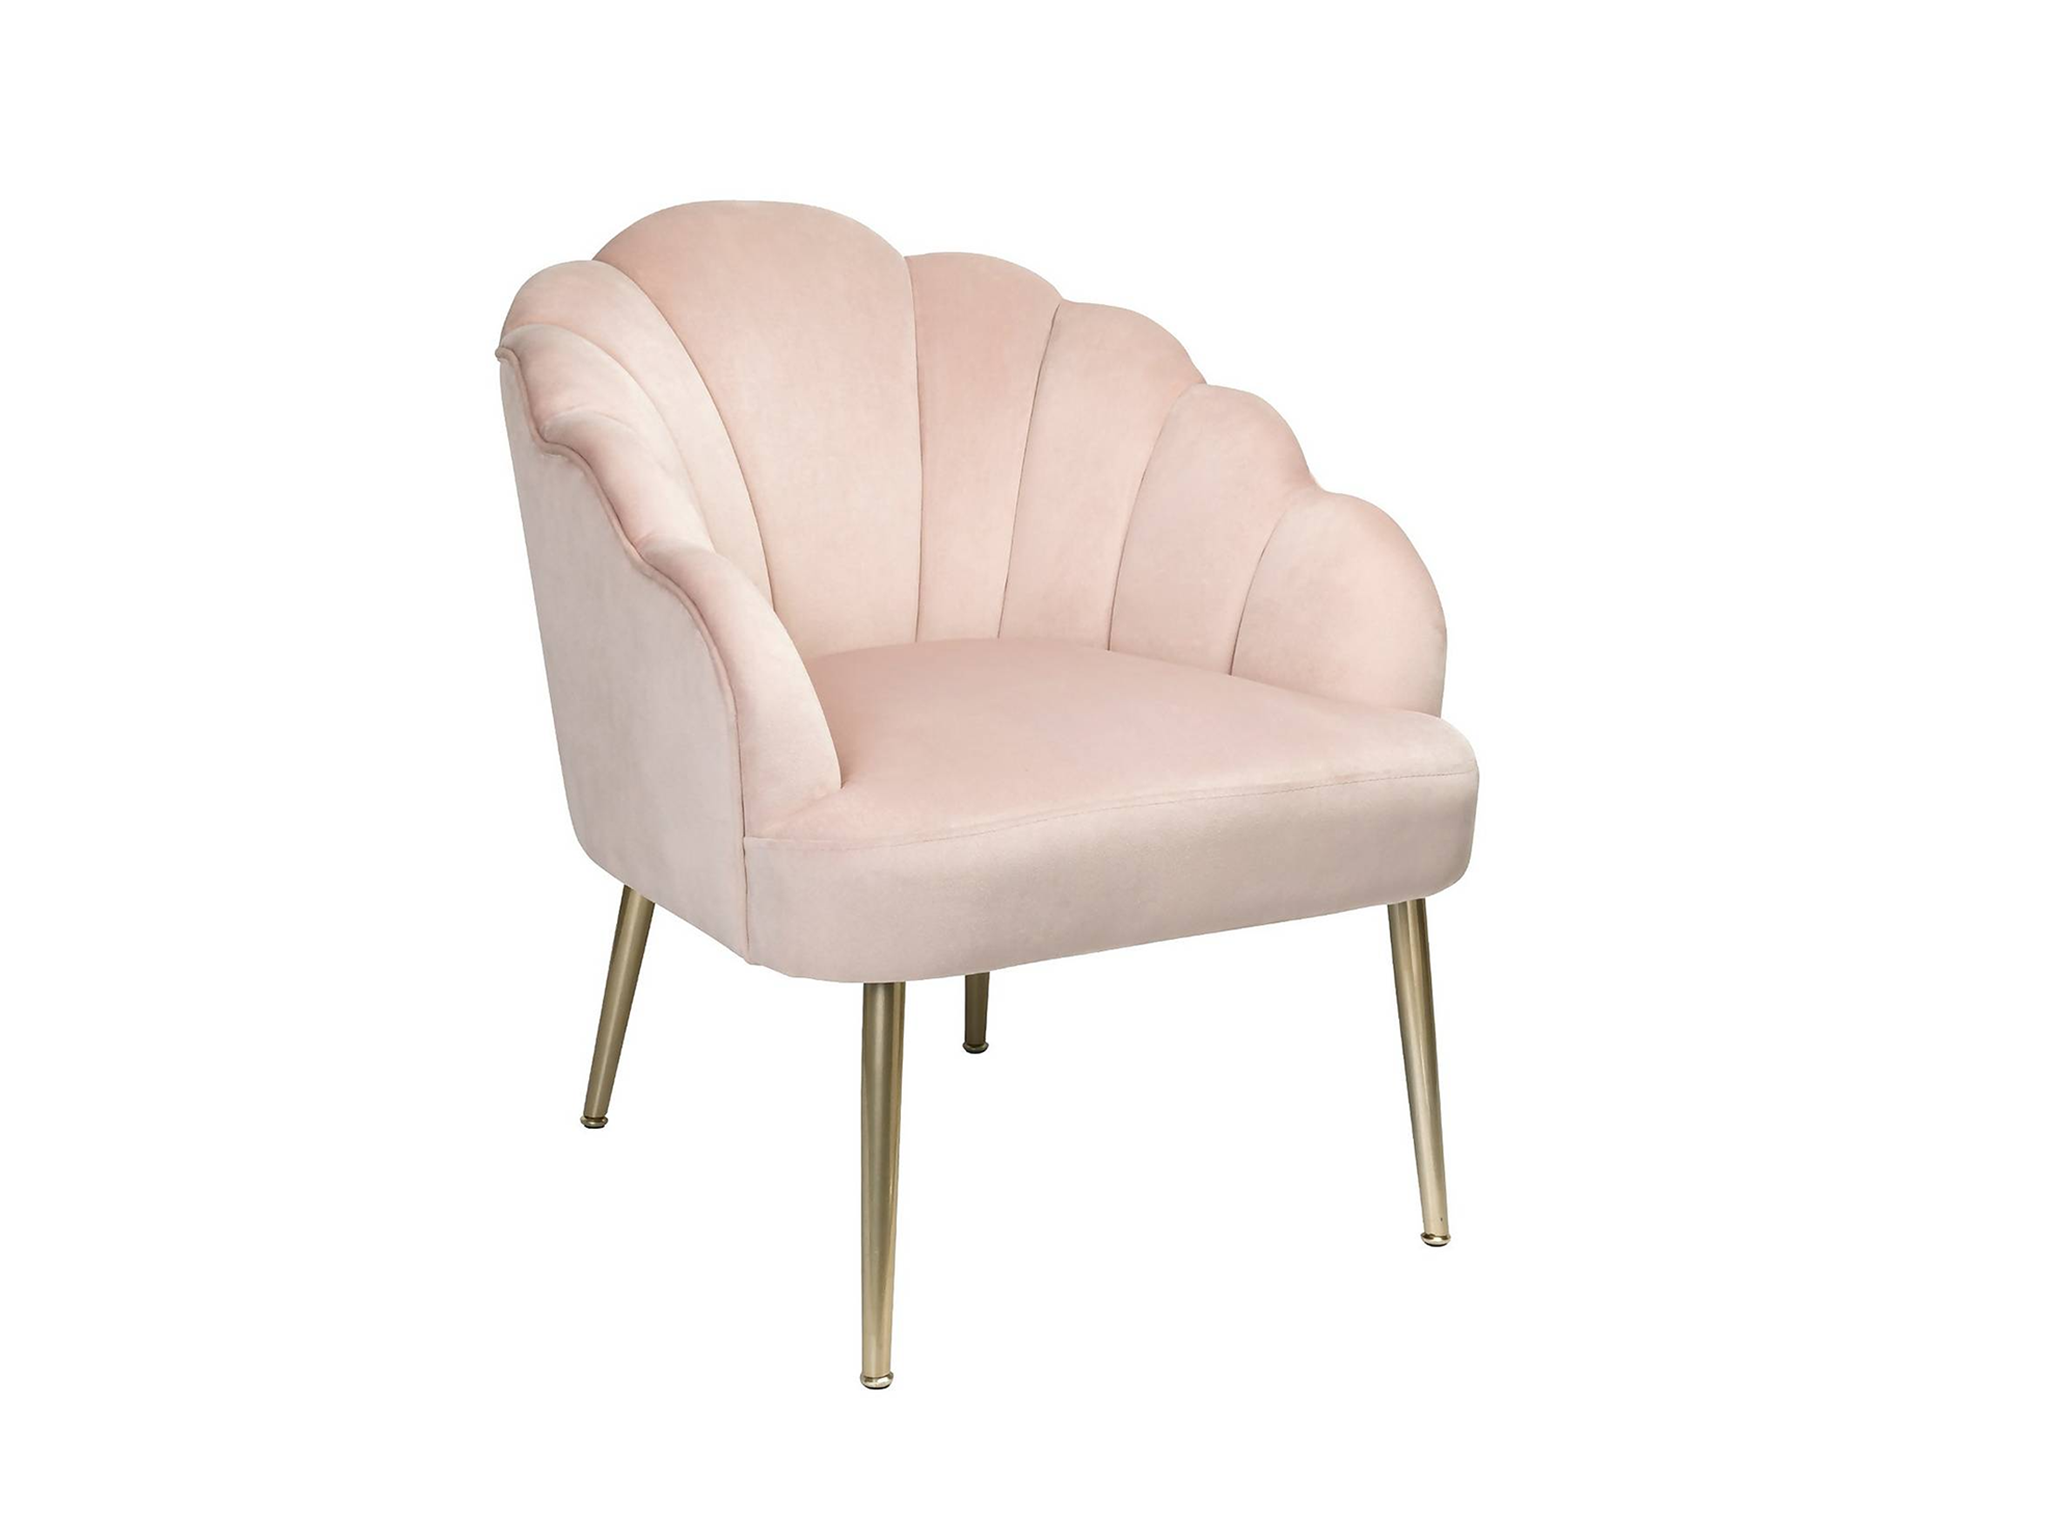 Sophia scallop occasional chair